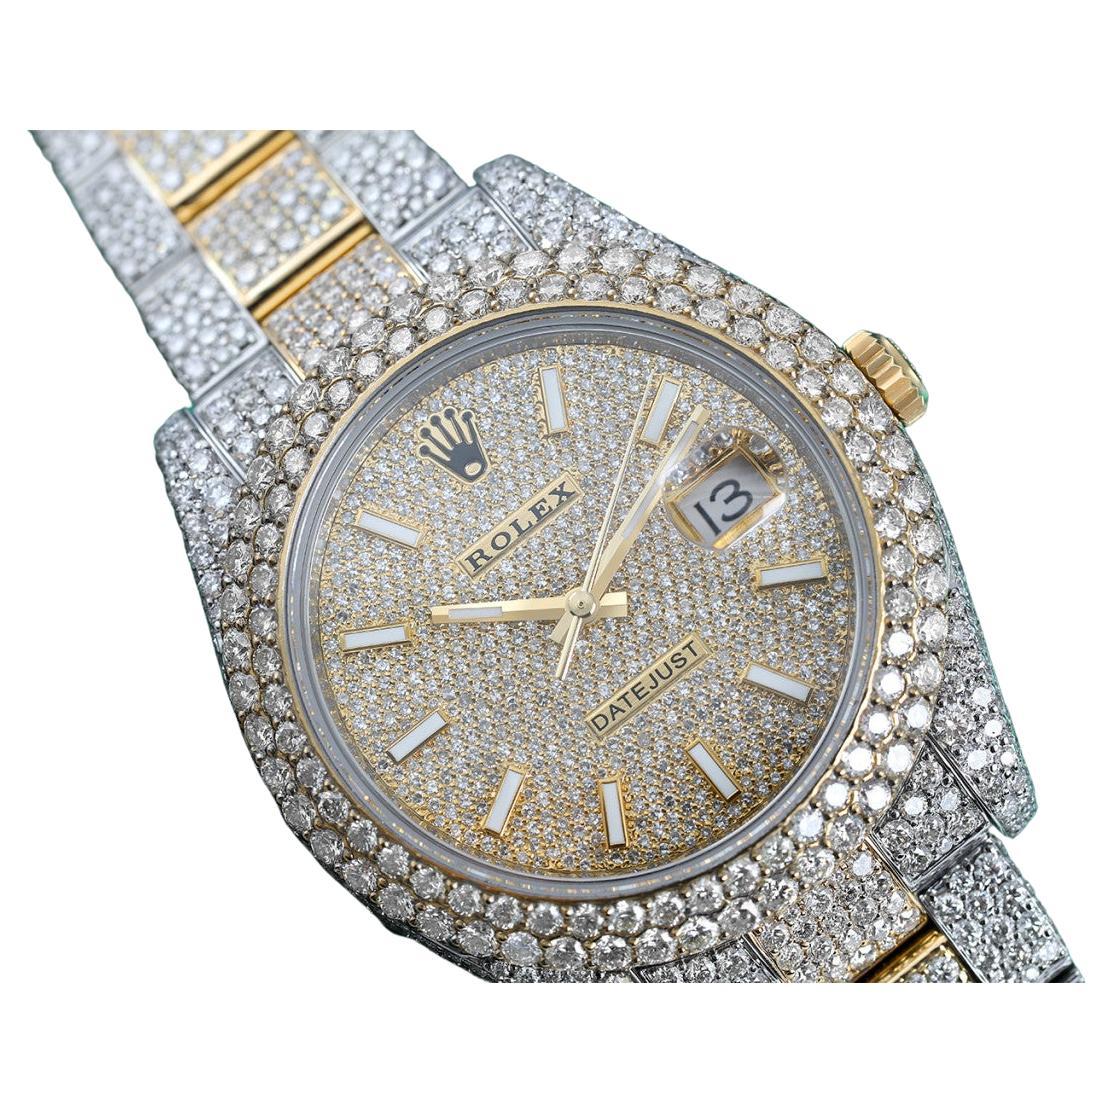 Rolex Datejust II Diamond Two Tone Stainless Steel and Yellow Gold Watch 126303